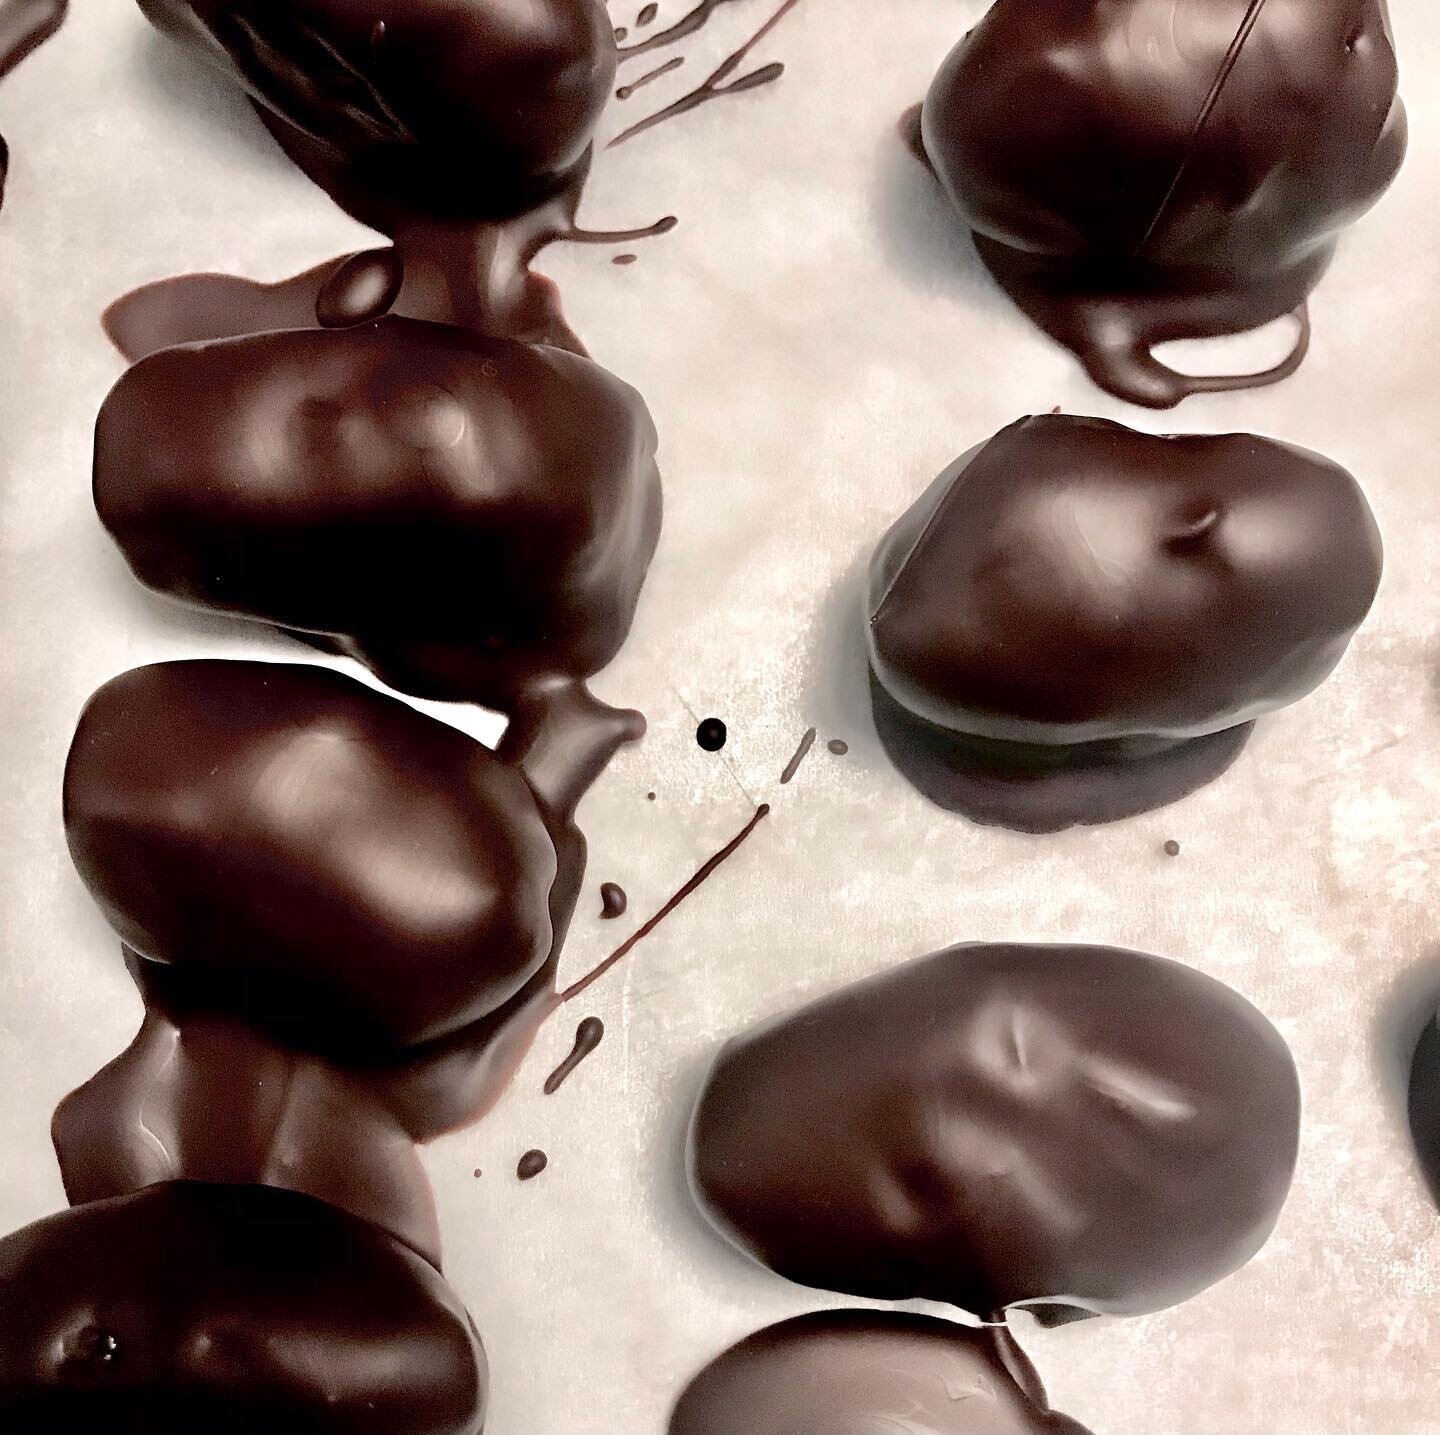 Deglet nour dates, stuffed with organic slow roasted hazelnuts and plunged in a divine pool of 100% dark chocolate from #Madagascar waiting patiently for a trim. 

#chocolatecoveredwellness

#vegan #glutenfree #dairyfree #refinedsugarfree #plantbased